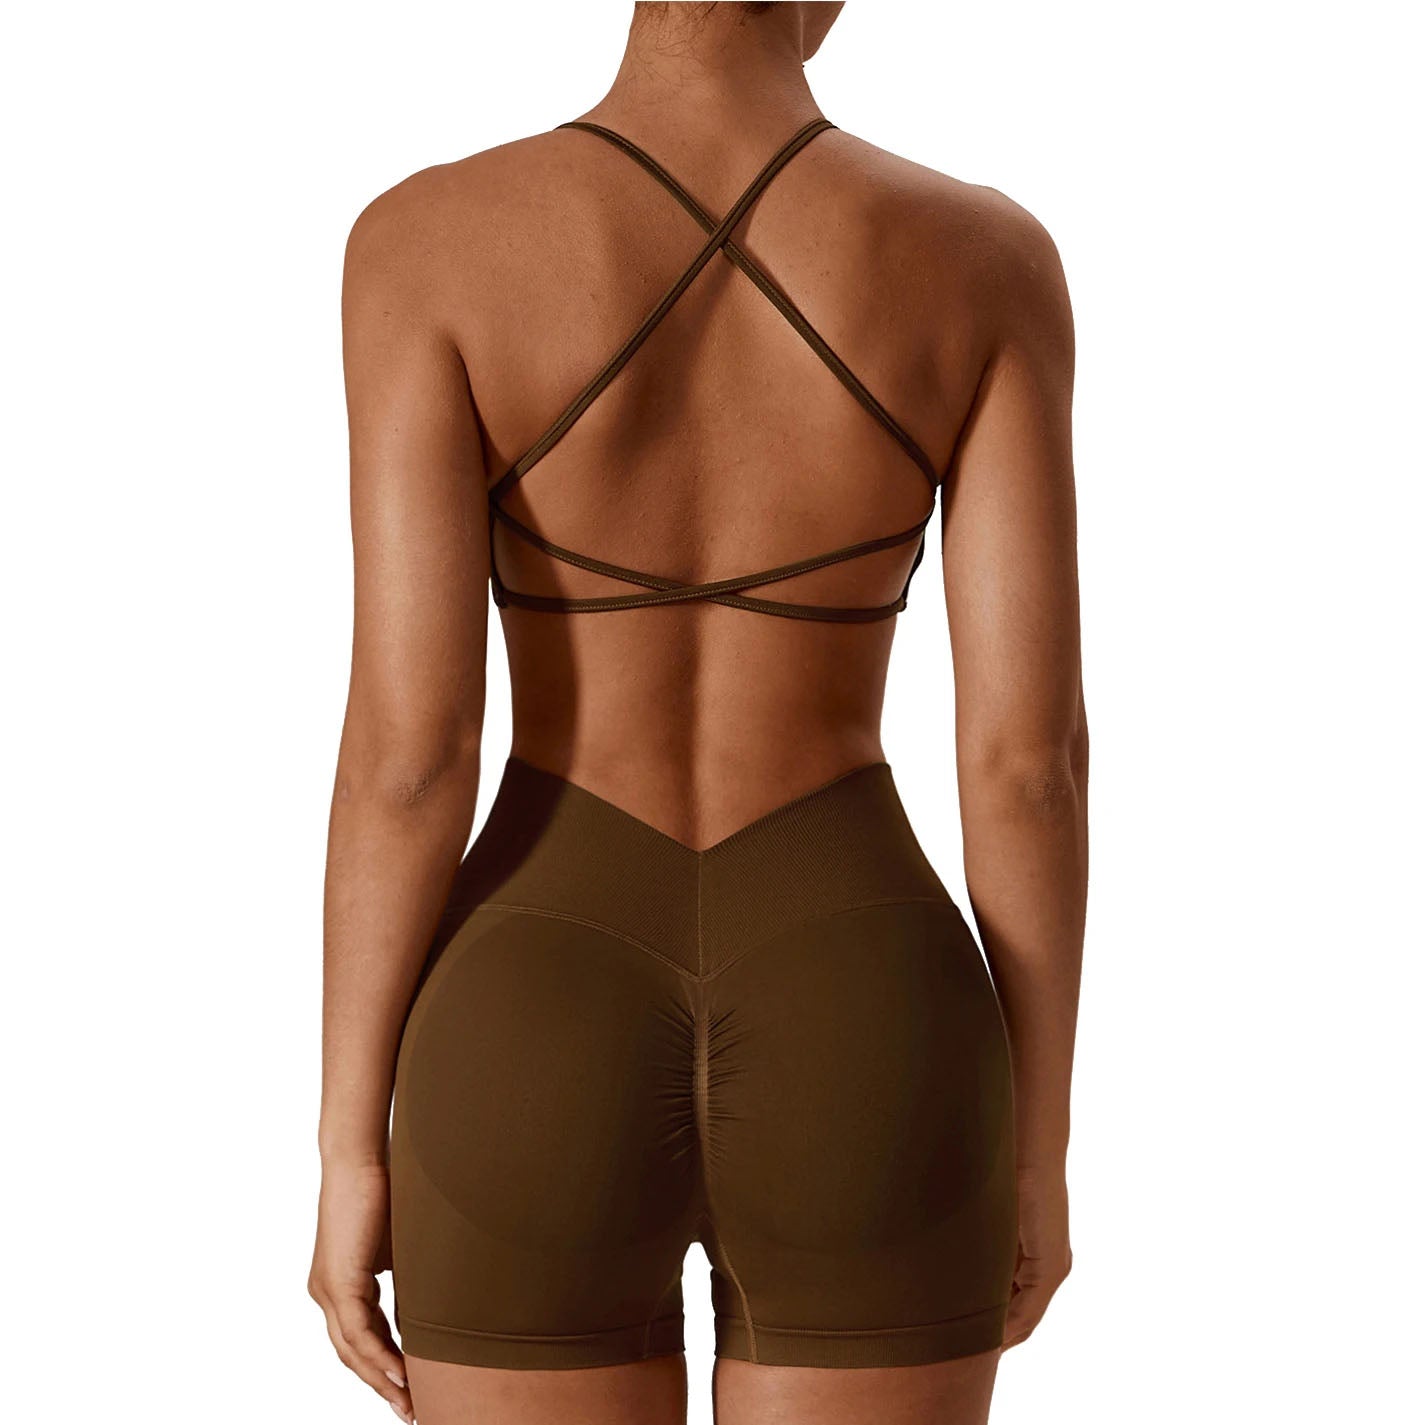 Seamless workout Shorts with Crop Top Set Brown